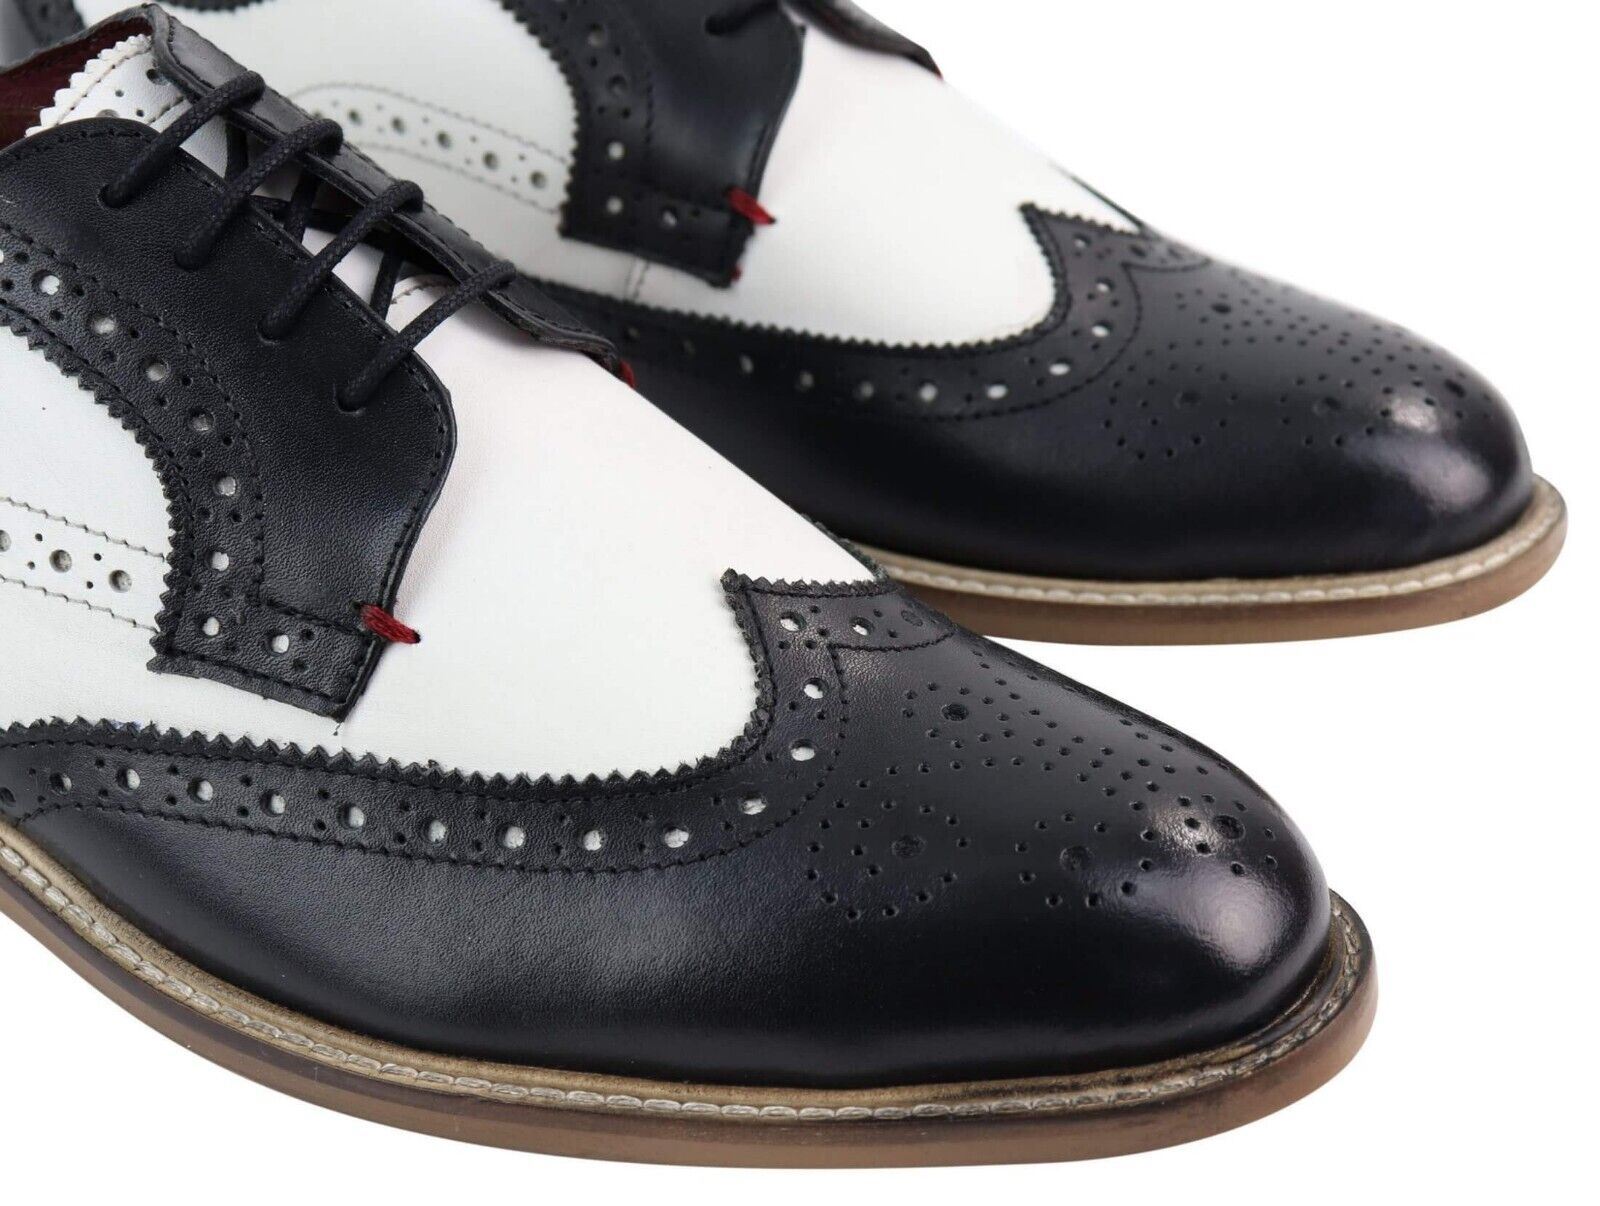 Mens Classic Oxford Brogue Gatsby Shoes in Black/White Leather